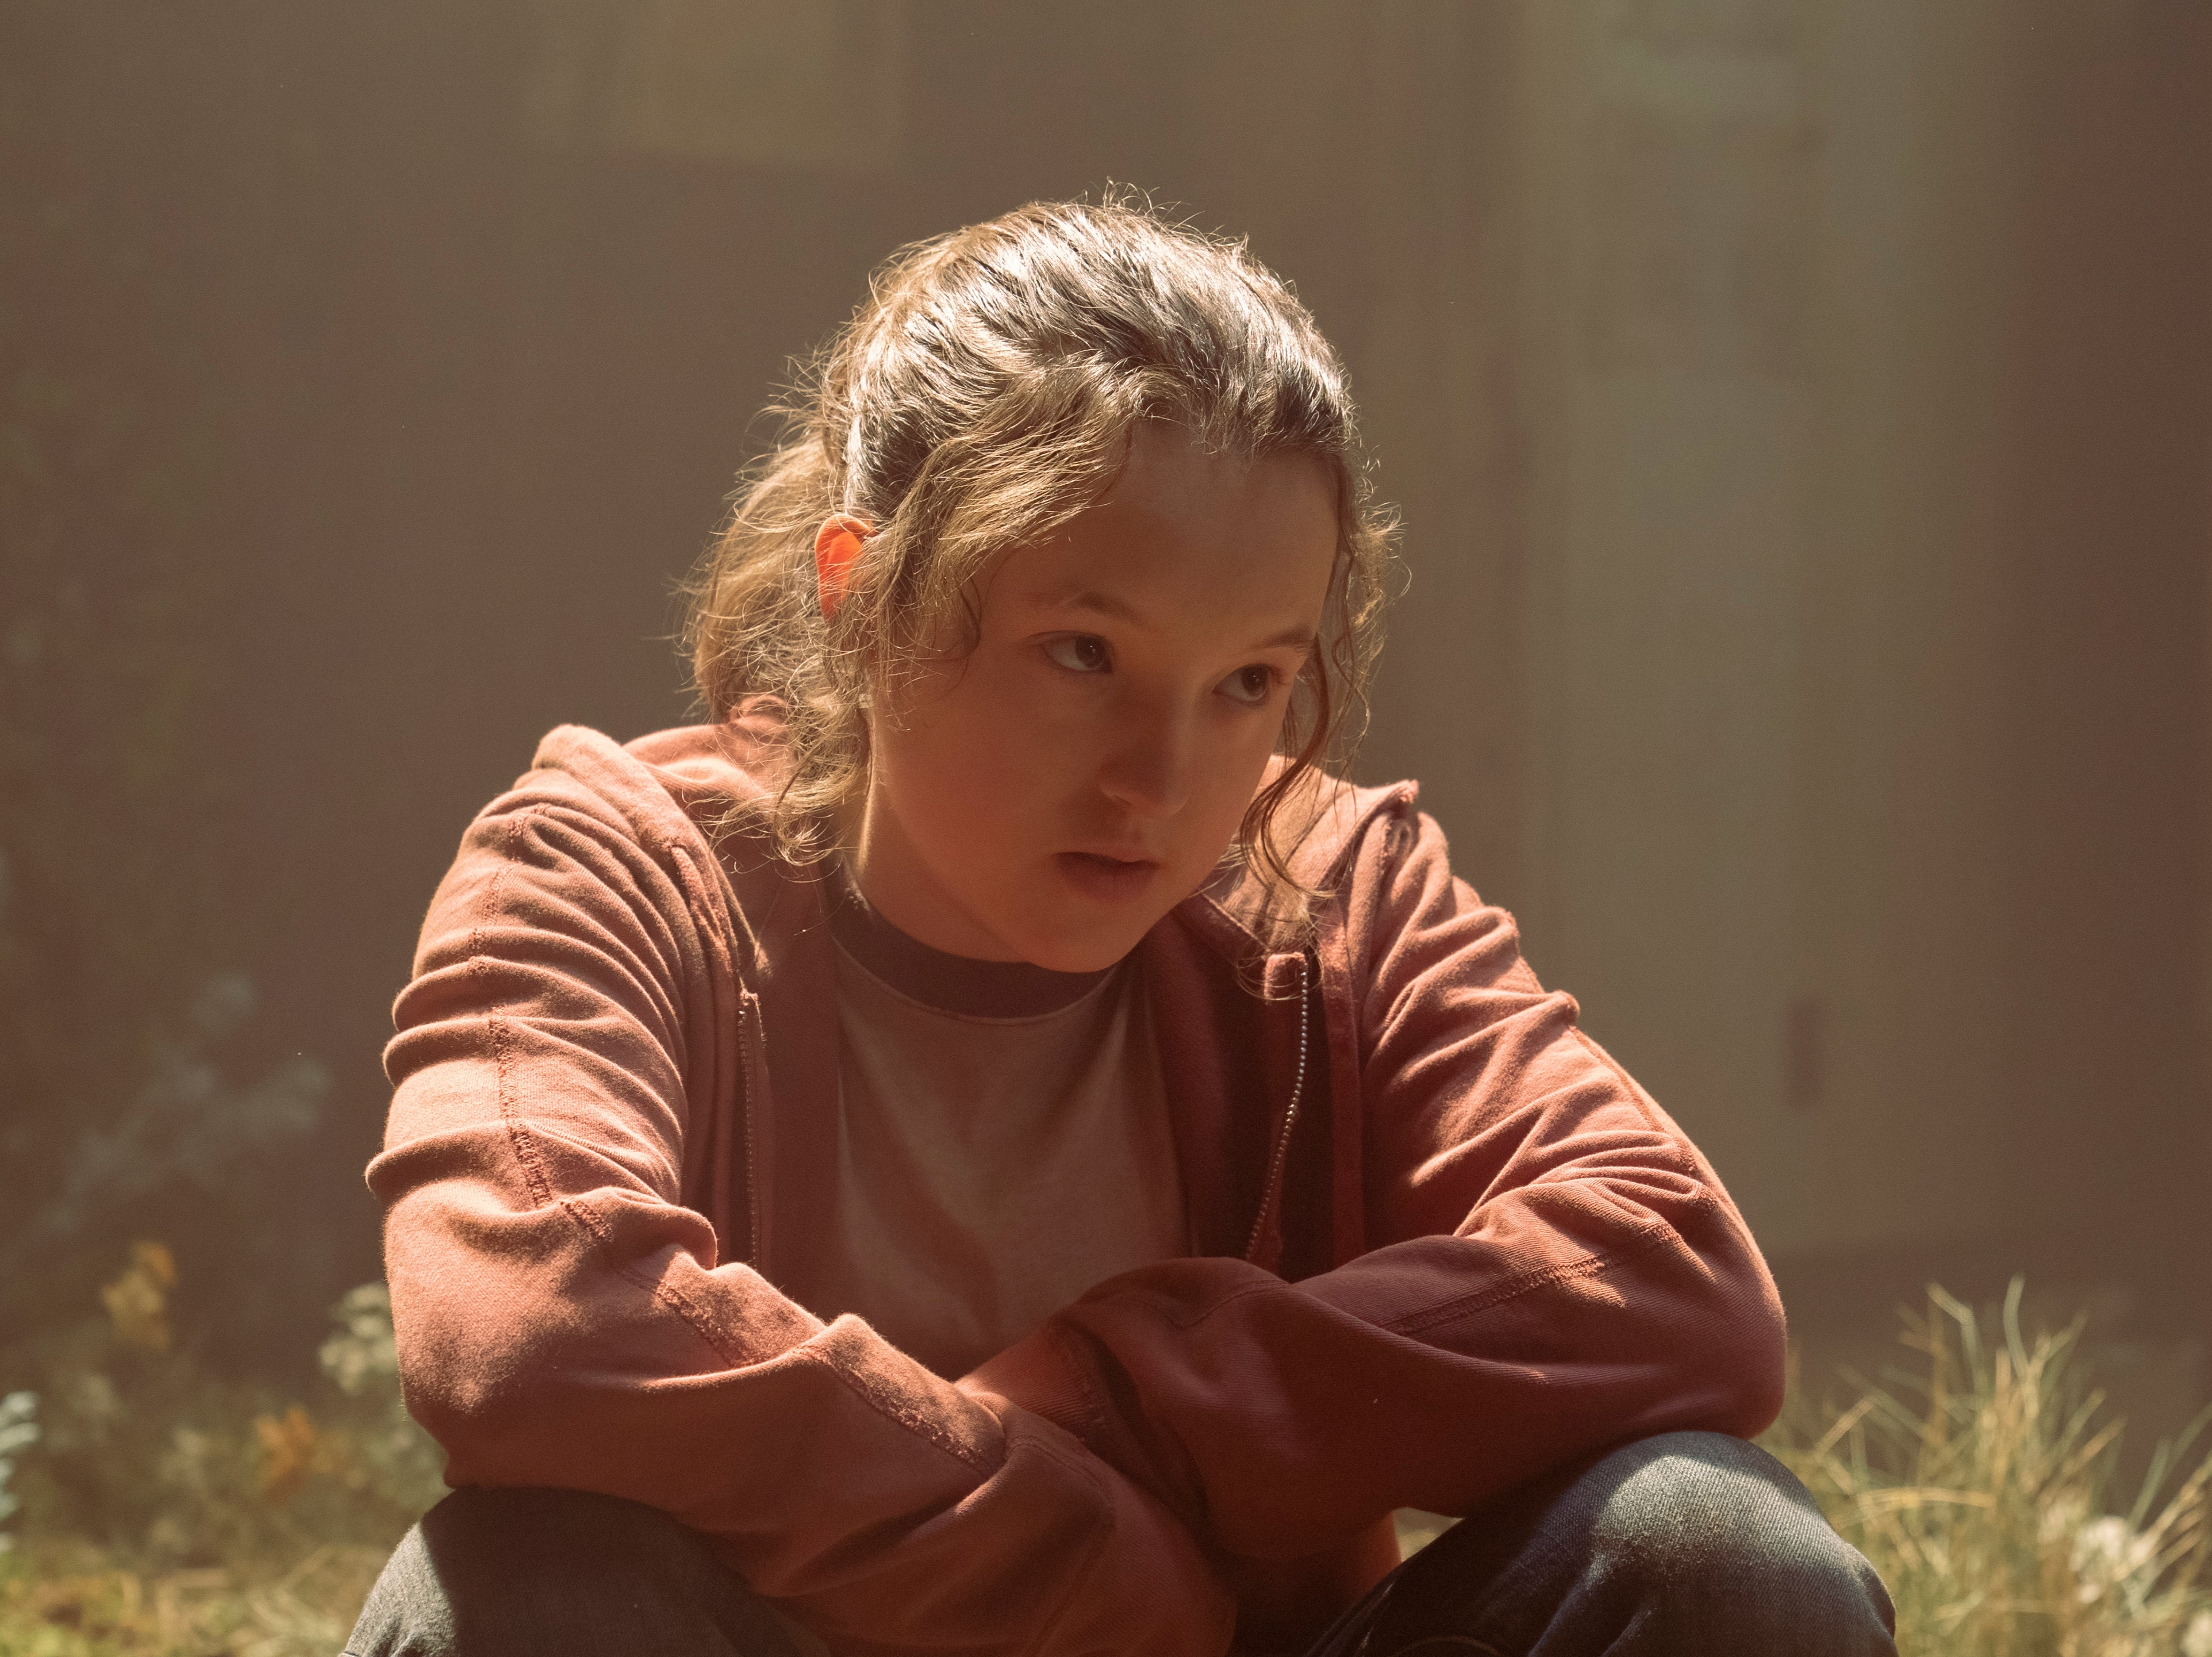 The Last of Us Star Bella Ramsey Opens Up About Gender Identity